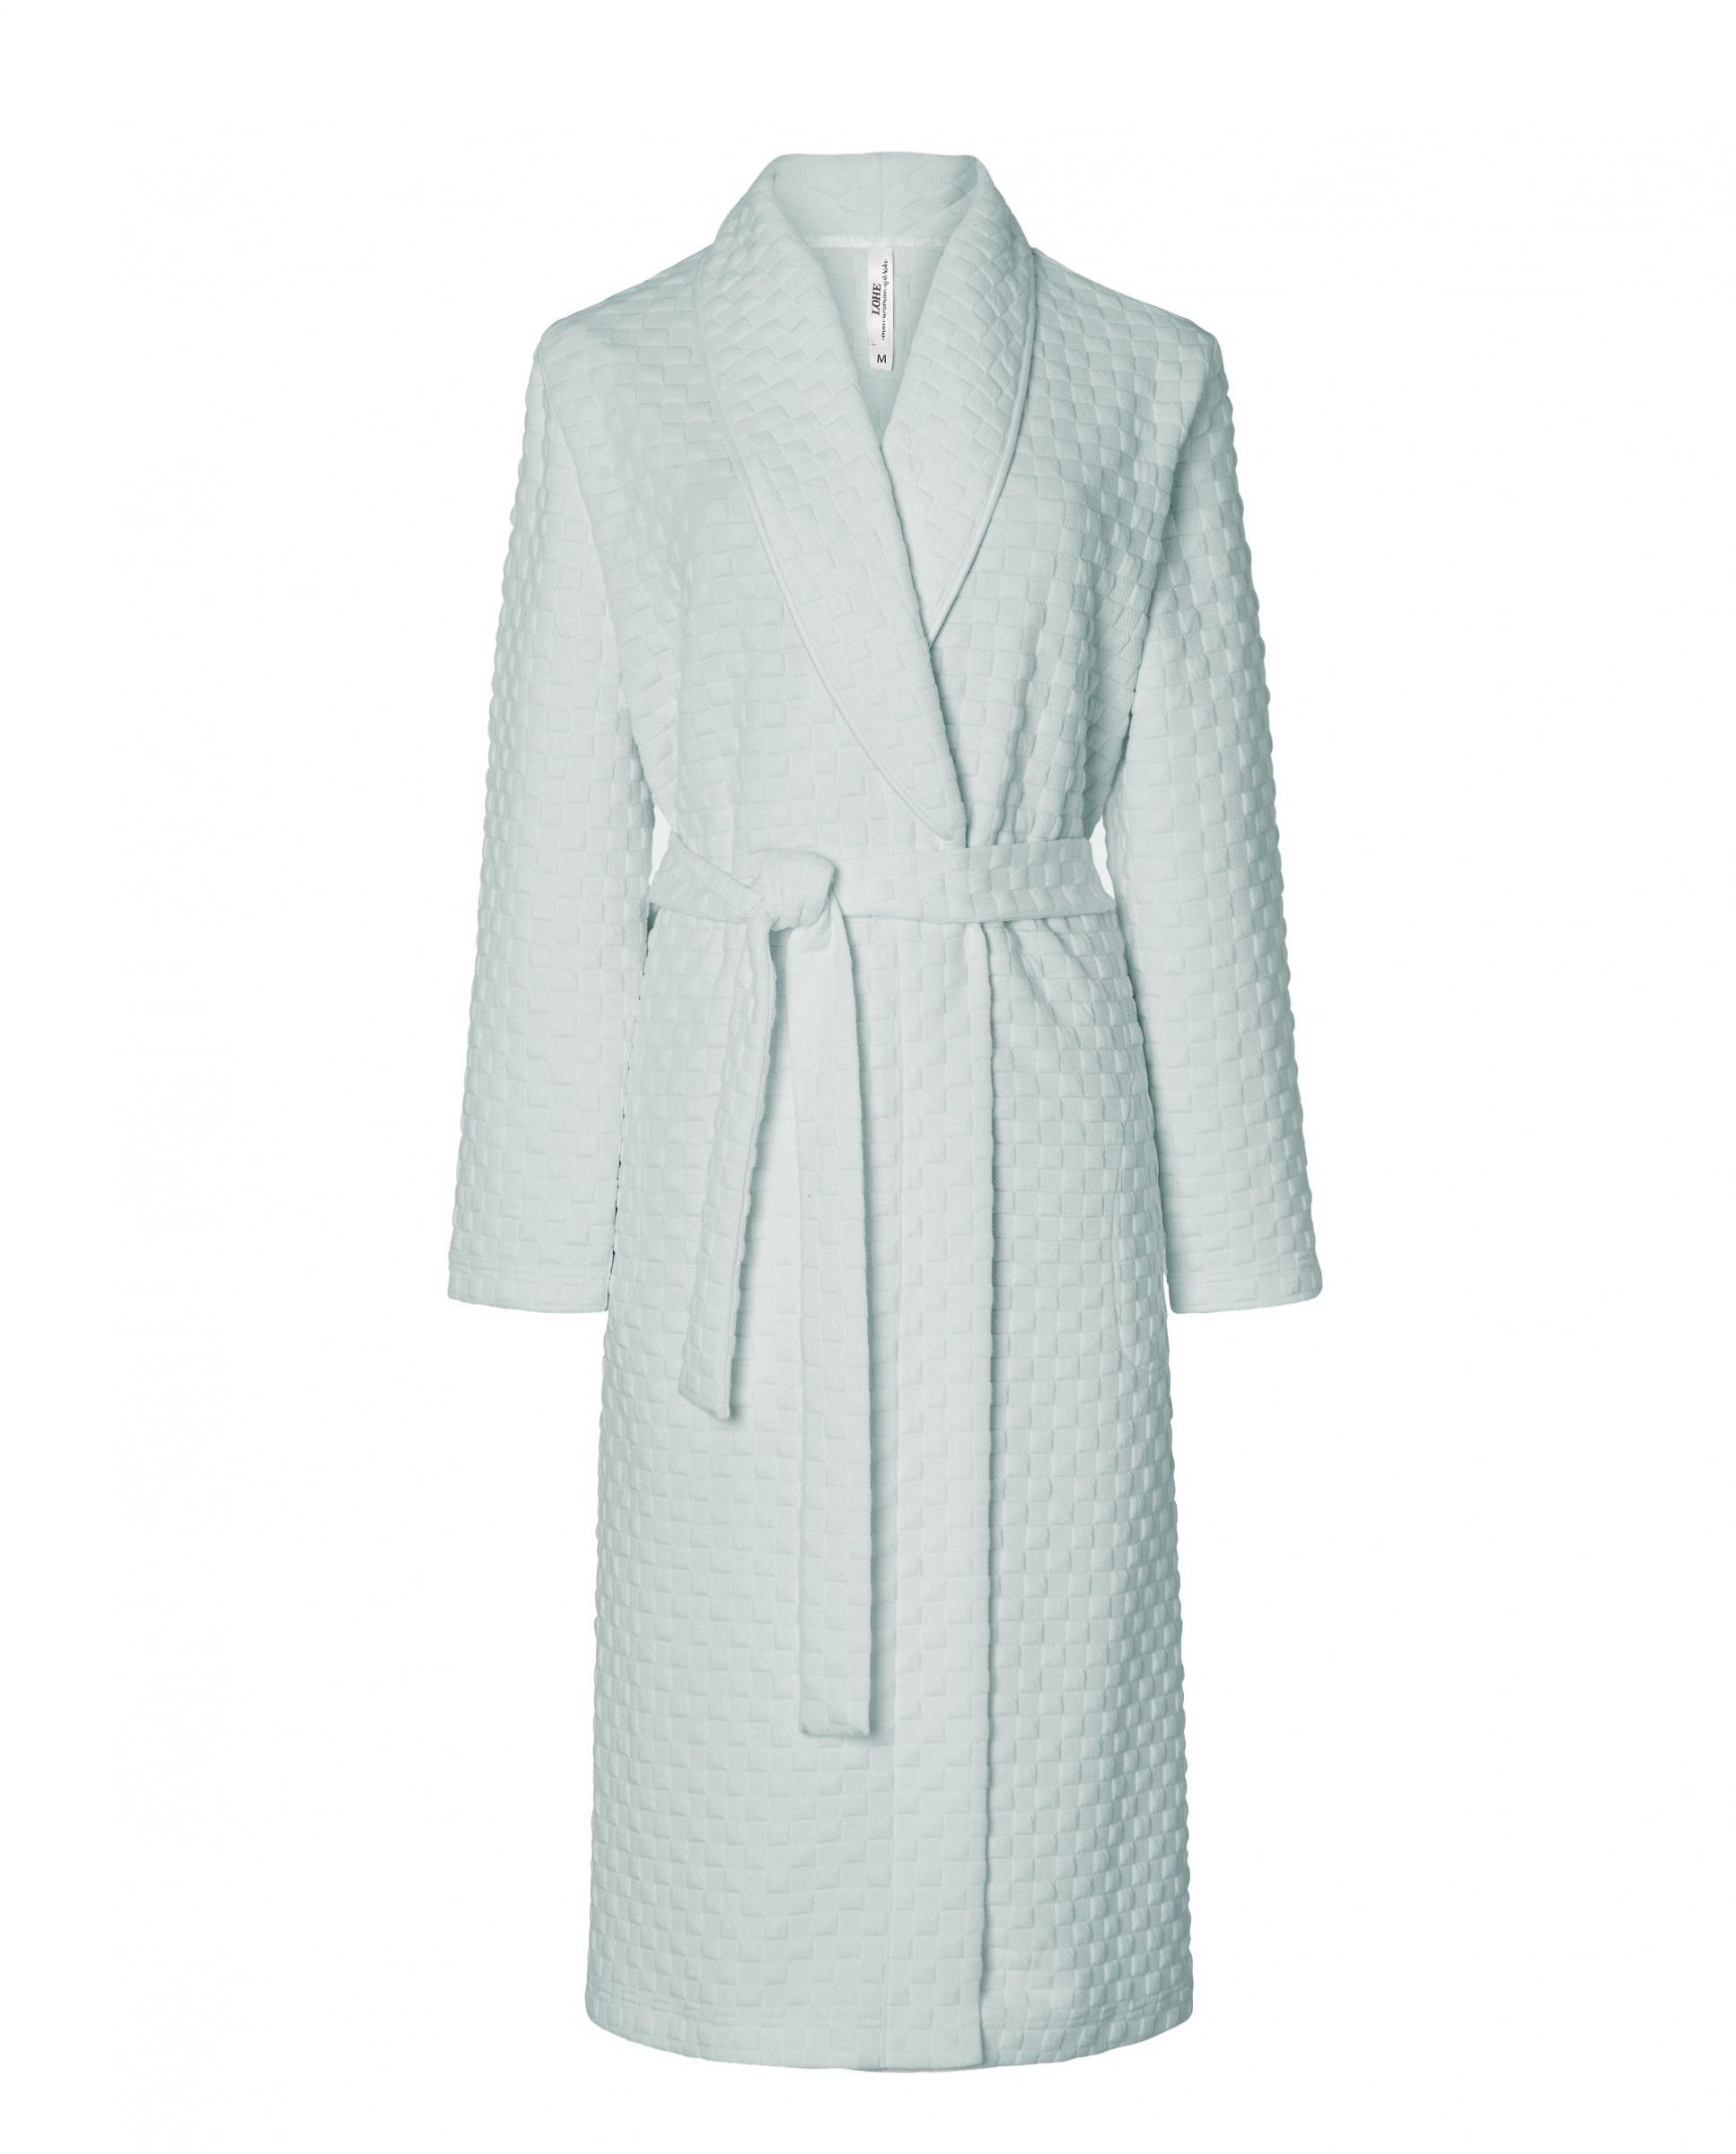 Lohe women's long dressing gown, long sleeve double breasted, green circular knitted fabric.